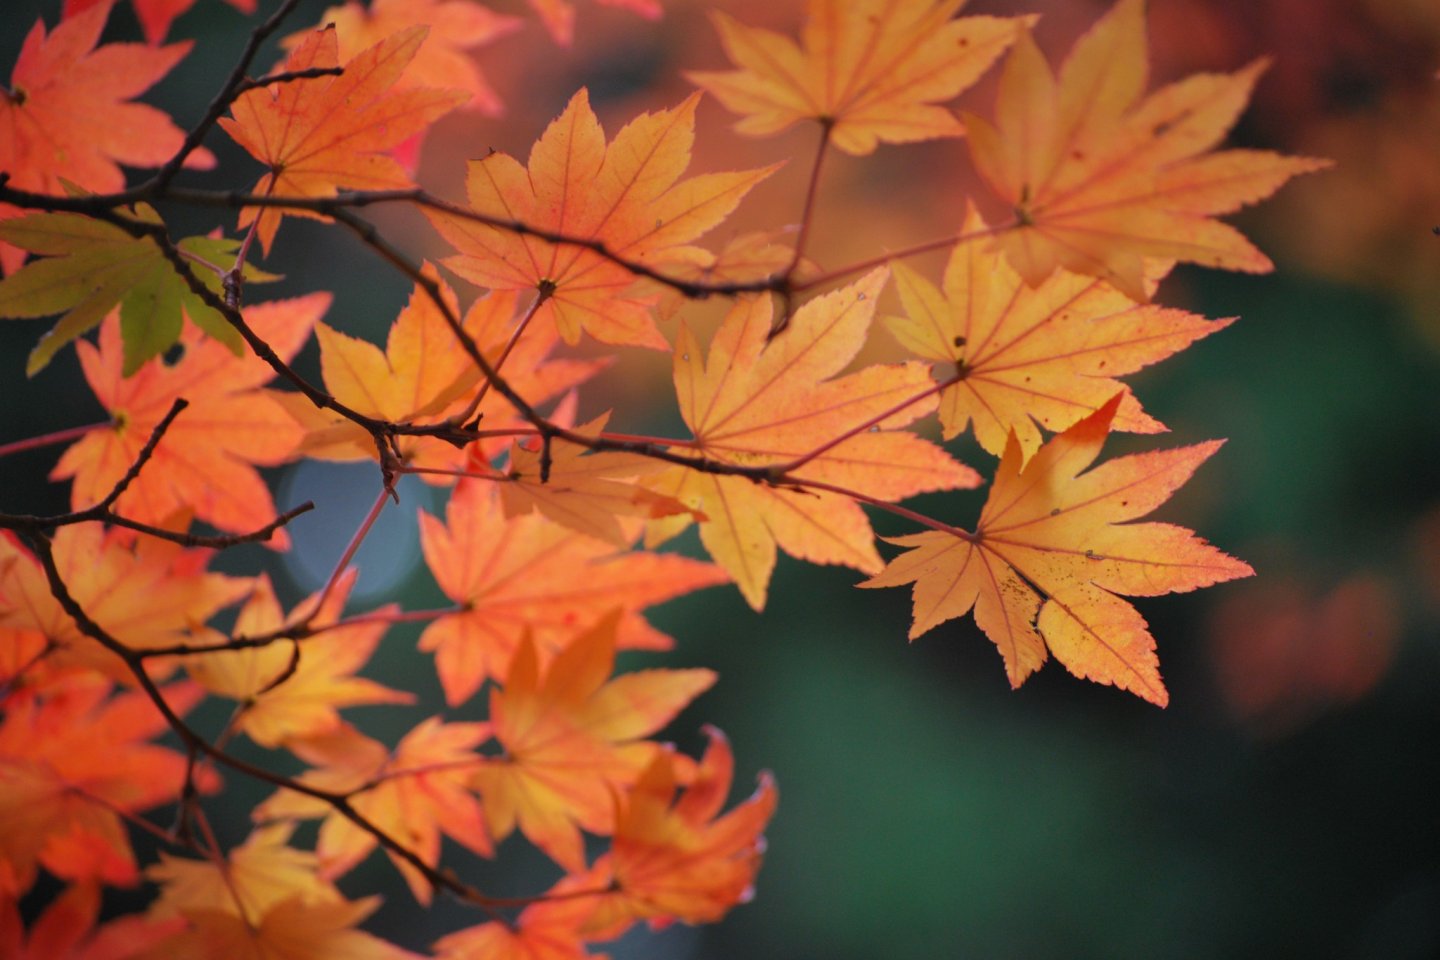 One of the best times of year to visit Koyasan is in autumn to see the momiji (maple leaves).  